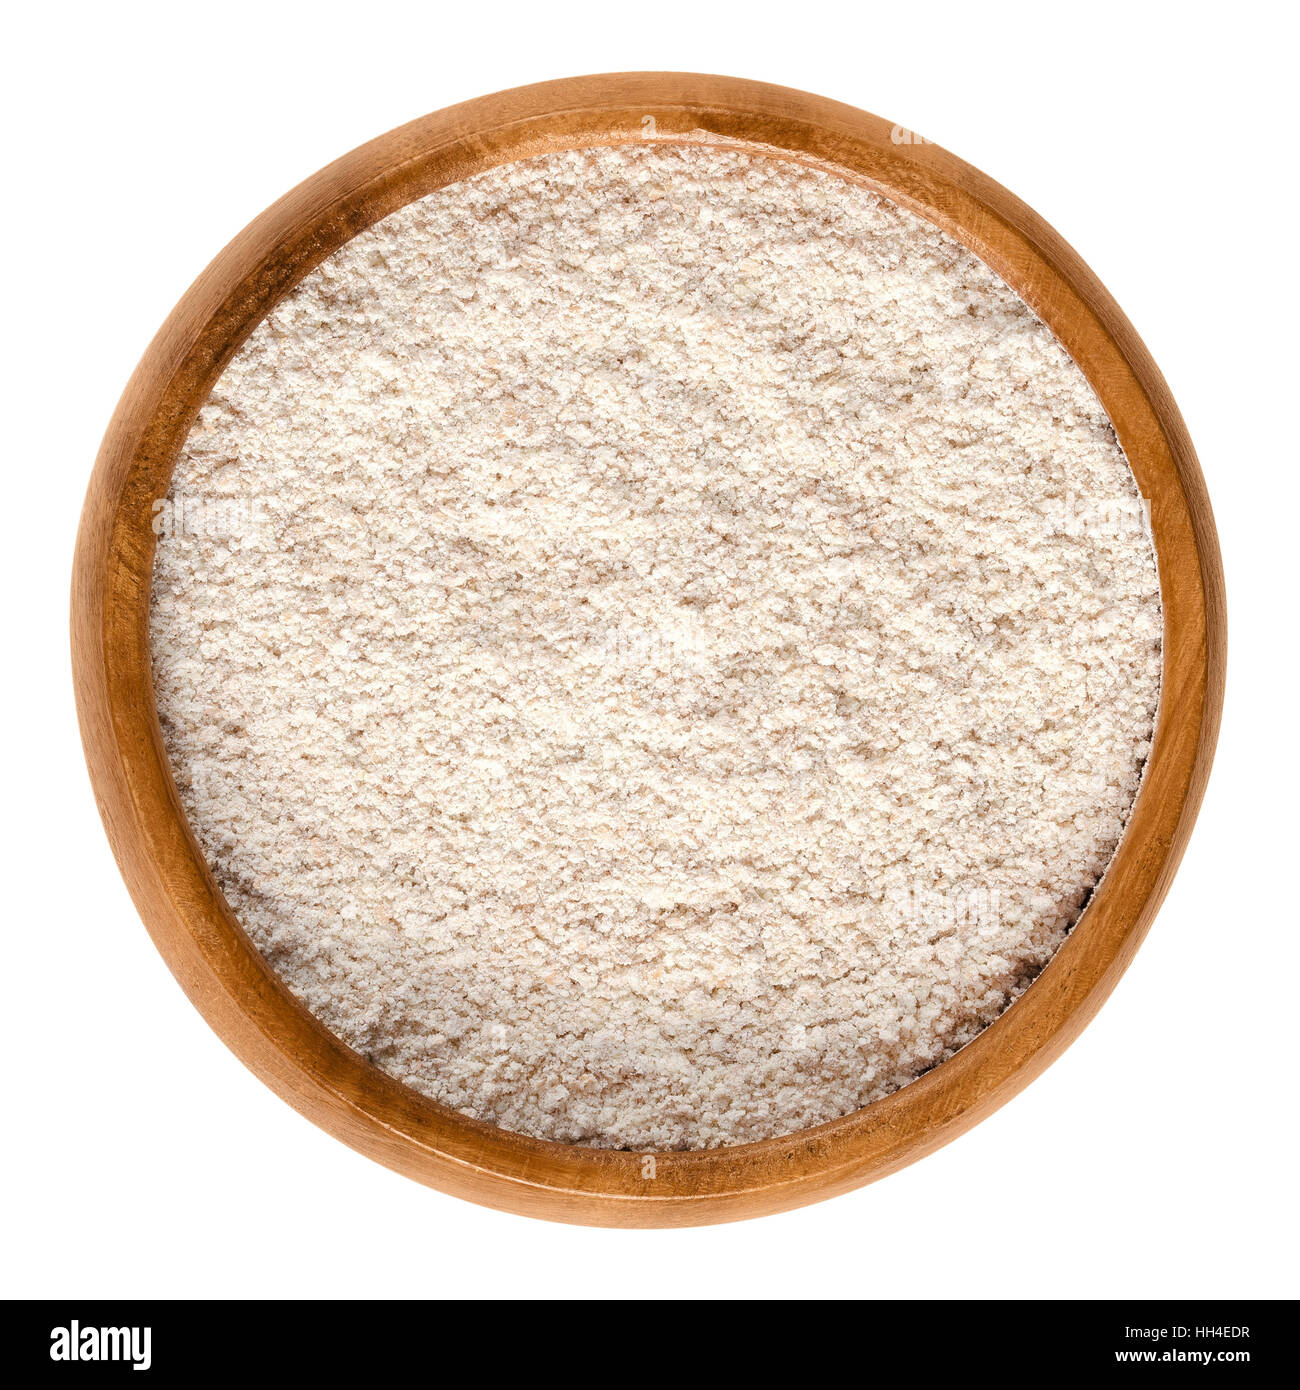 Whole-wheat flour in wooden bowl. Wholemeal flour, a powdery substance and basic food ingredient, made by grinding whole grain. Stock Photo